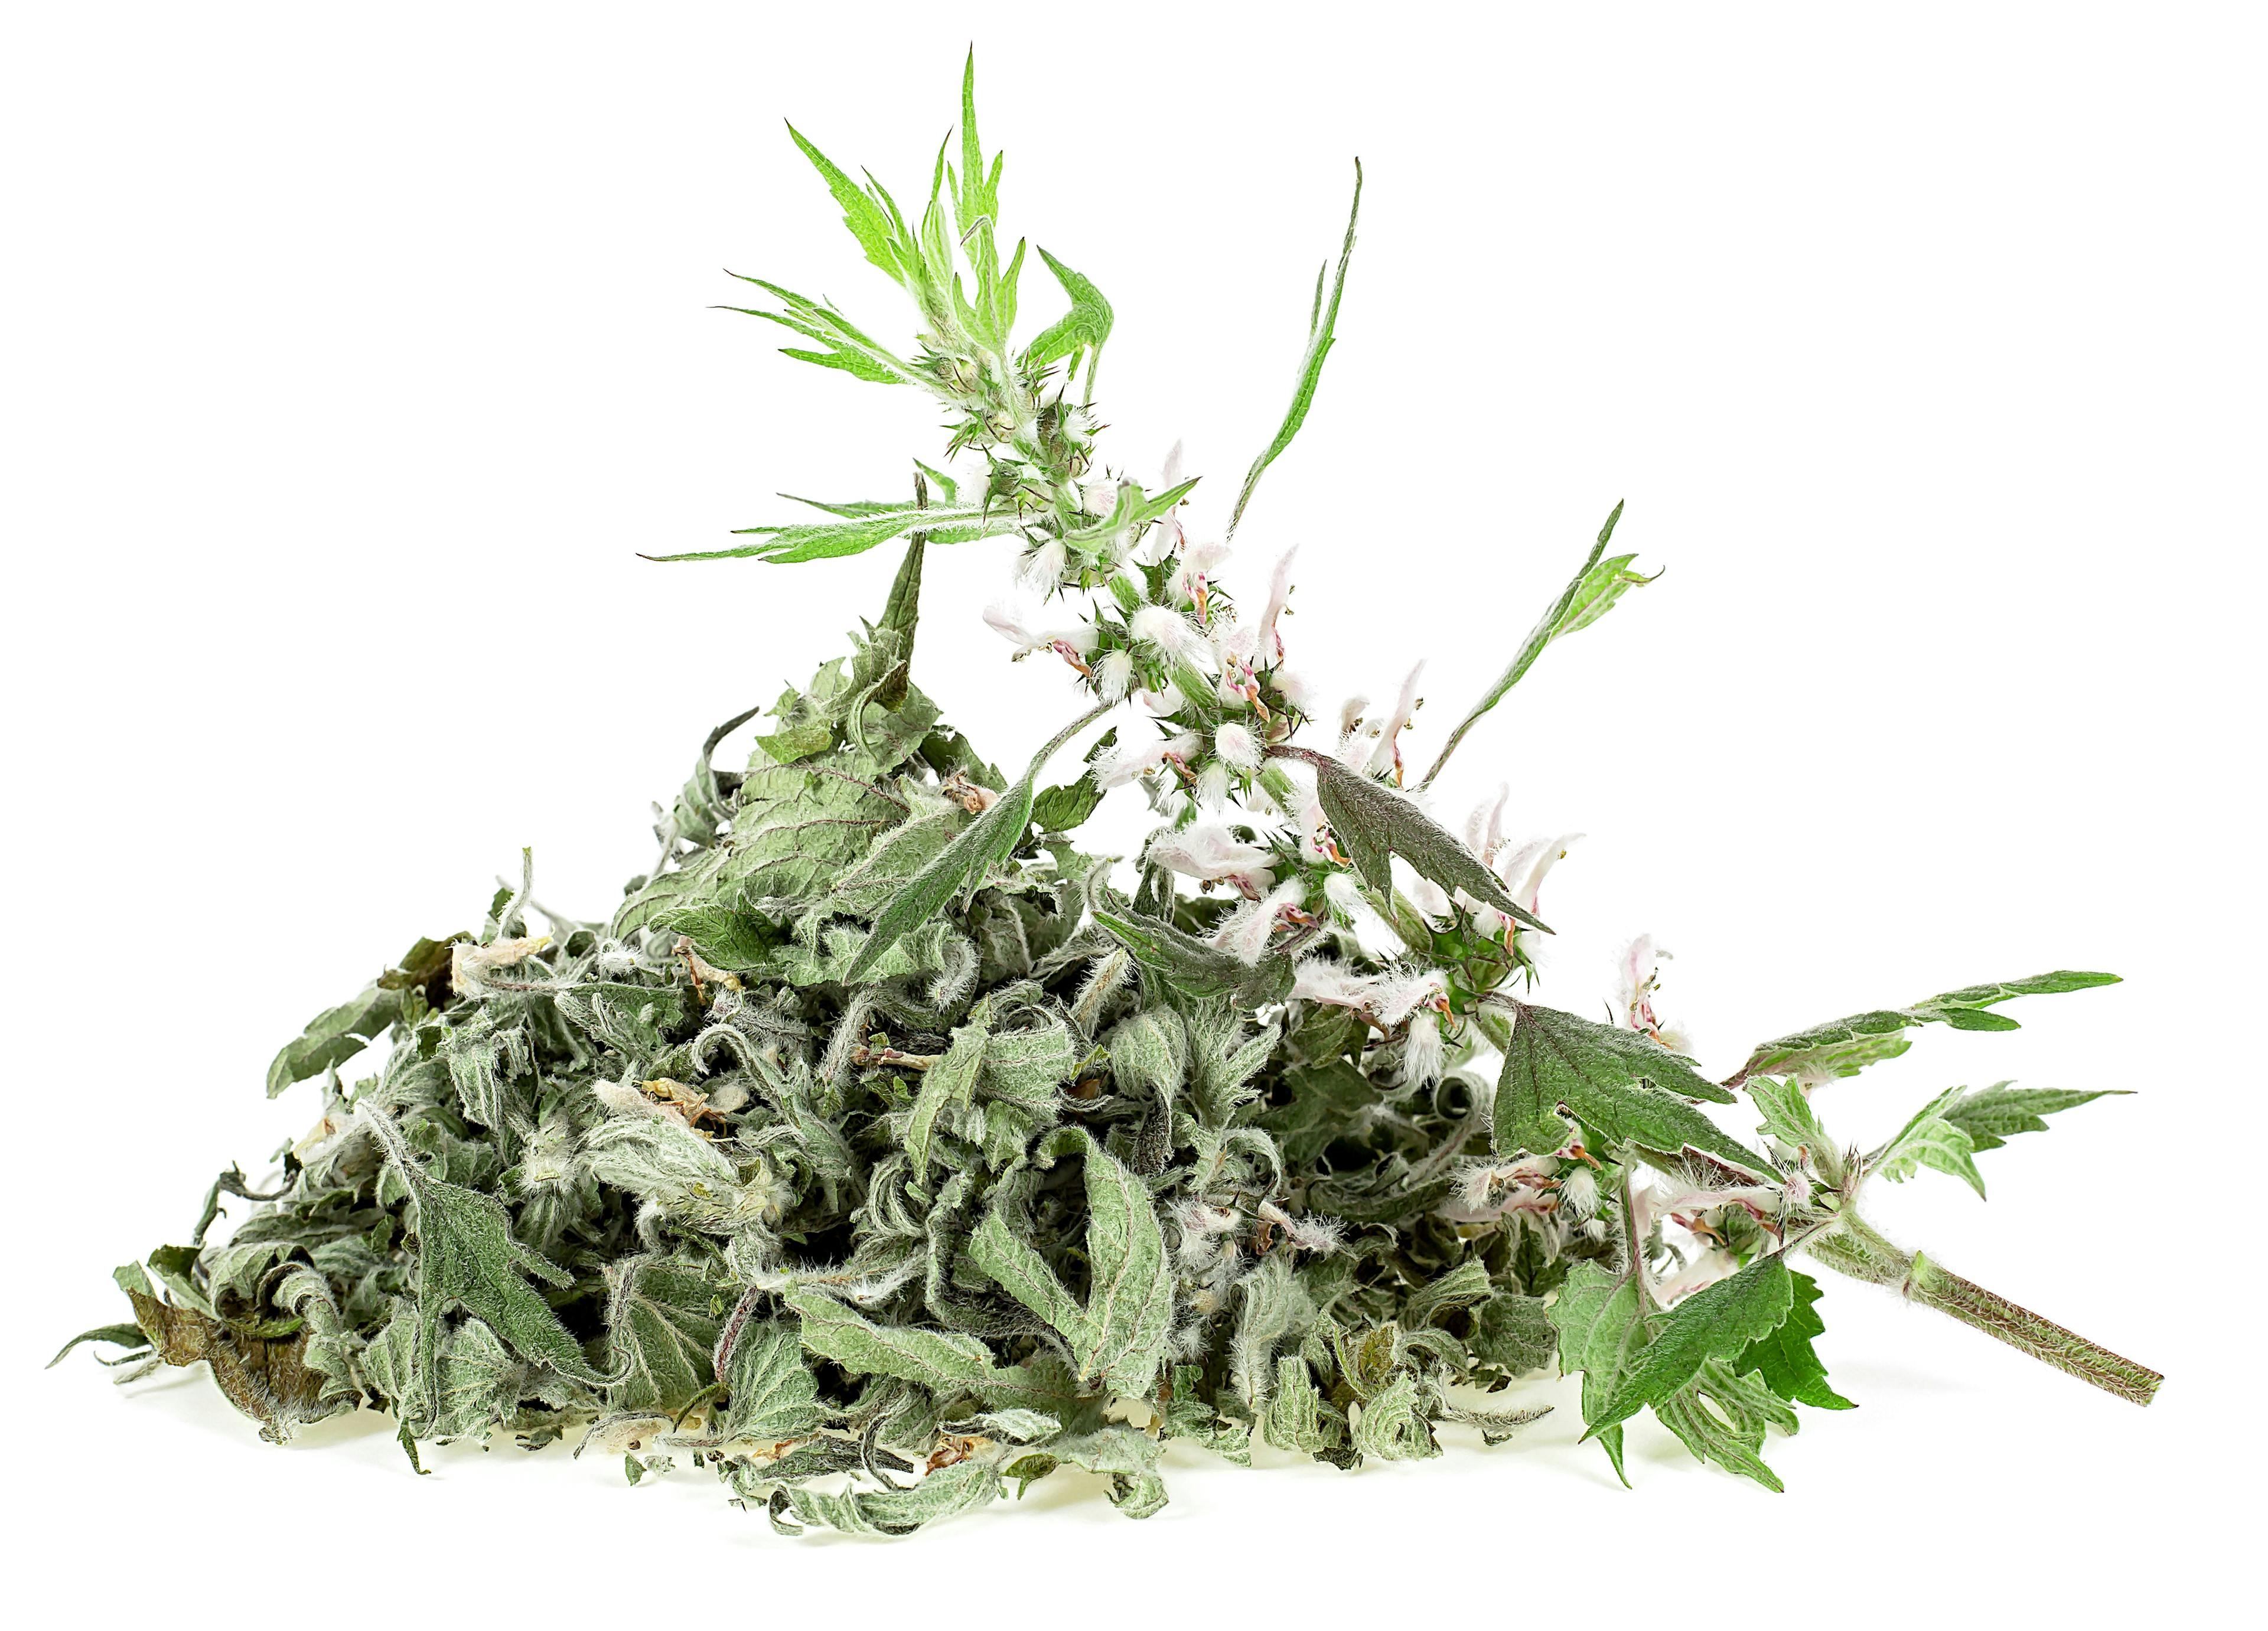 Pile of dried motherwort plant and fresh branch of motherwort isolated on a white background. Herbal medicine - Leonurus Cardiaca. | Image Credit: © domnitsky